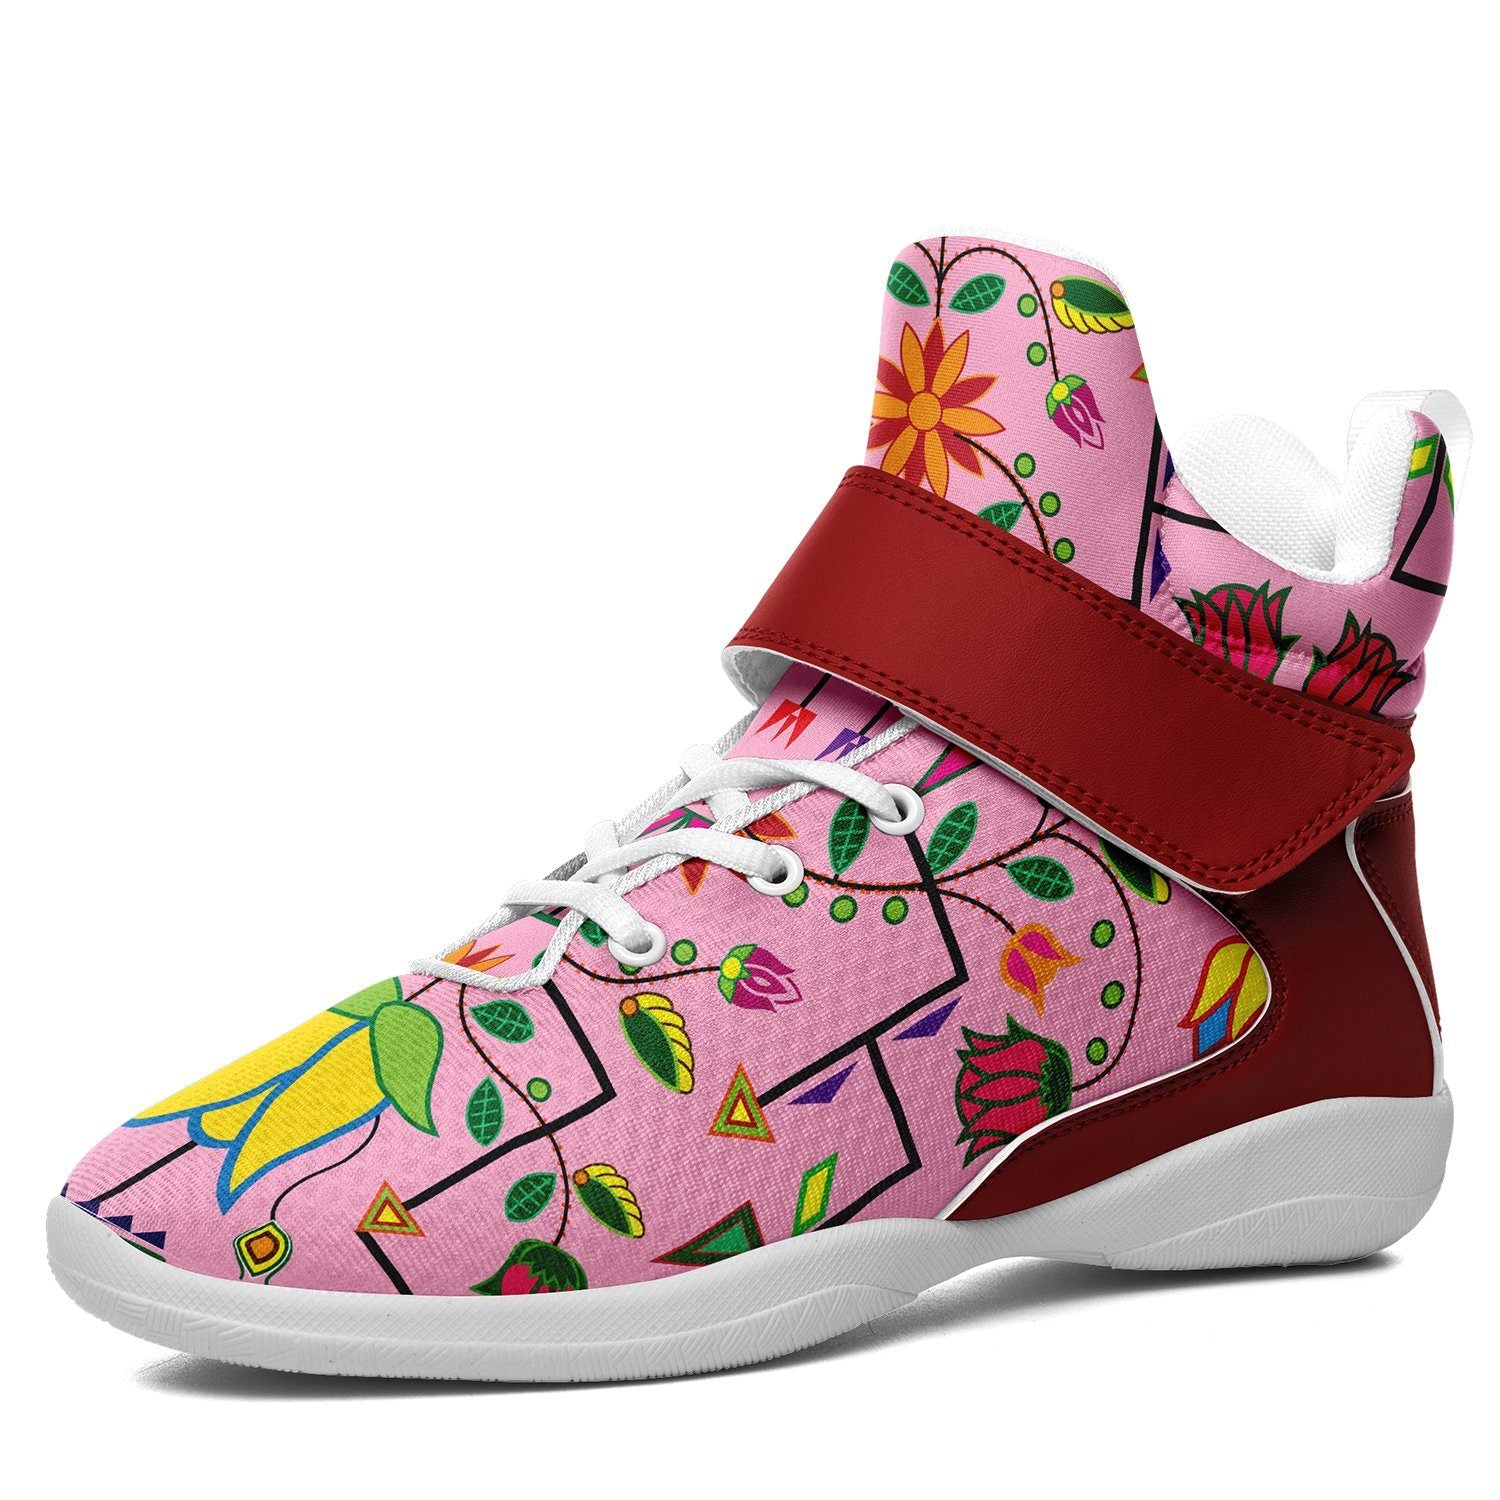 Geometric Floral Summer Sunset Ipottaa Basketball / Sport High Top Shoes 49 Dzine US Women 4.5 / US Youth 3.5 / EUR 35 White Sole with Dark Red Strap 